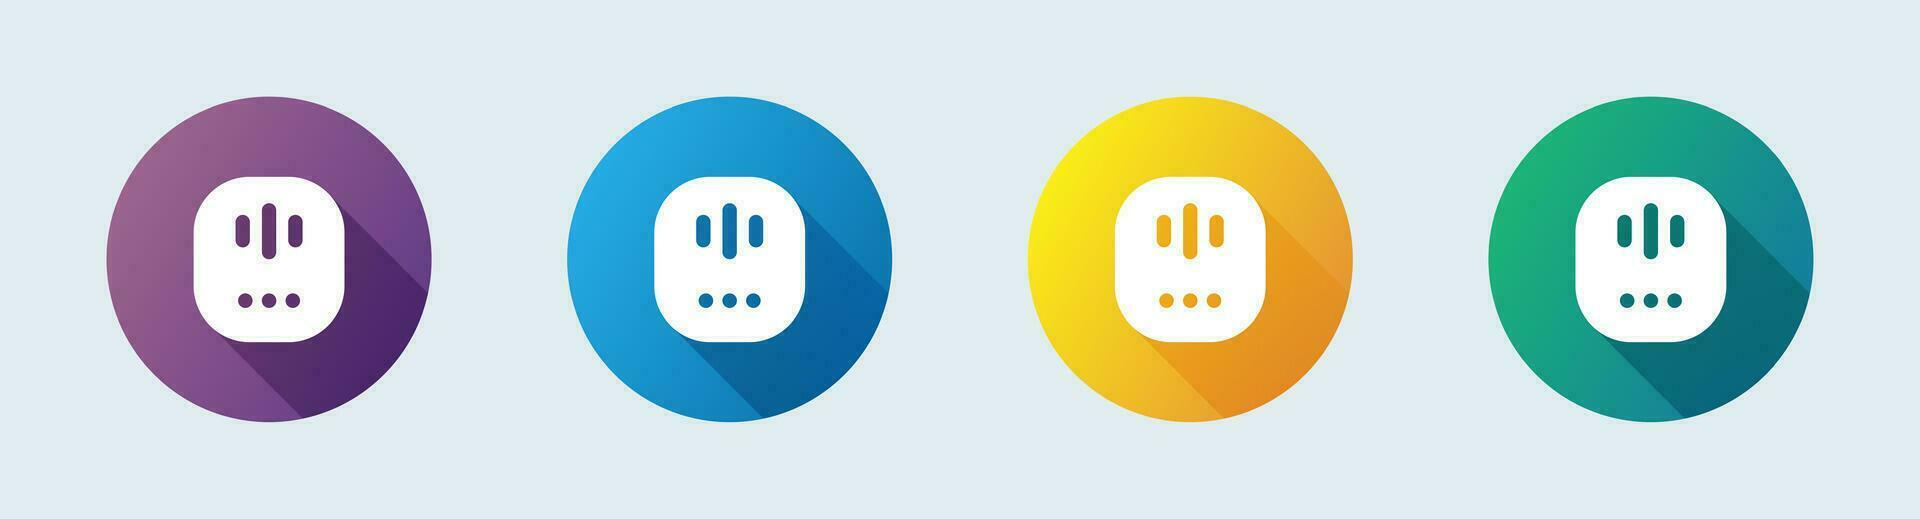 Voice assistant solid icon in flat design style. Smart talk signs vector illustration.